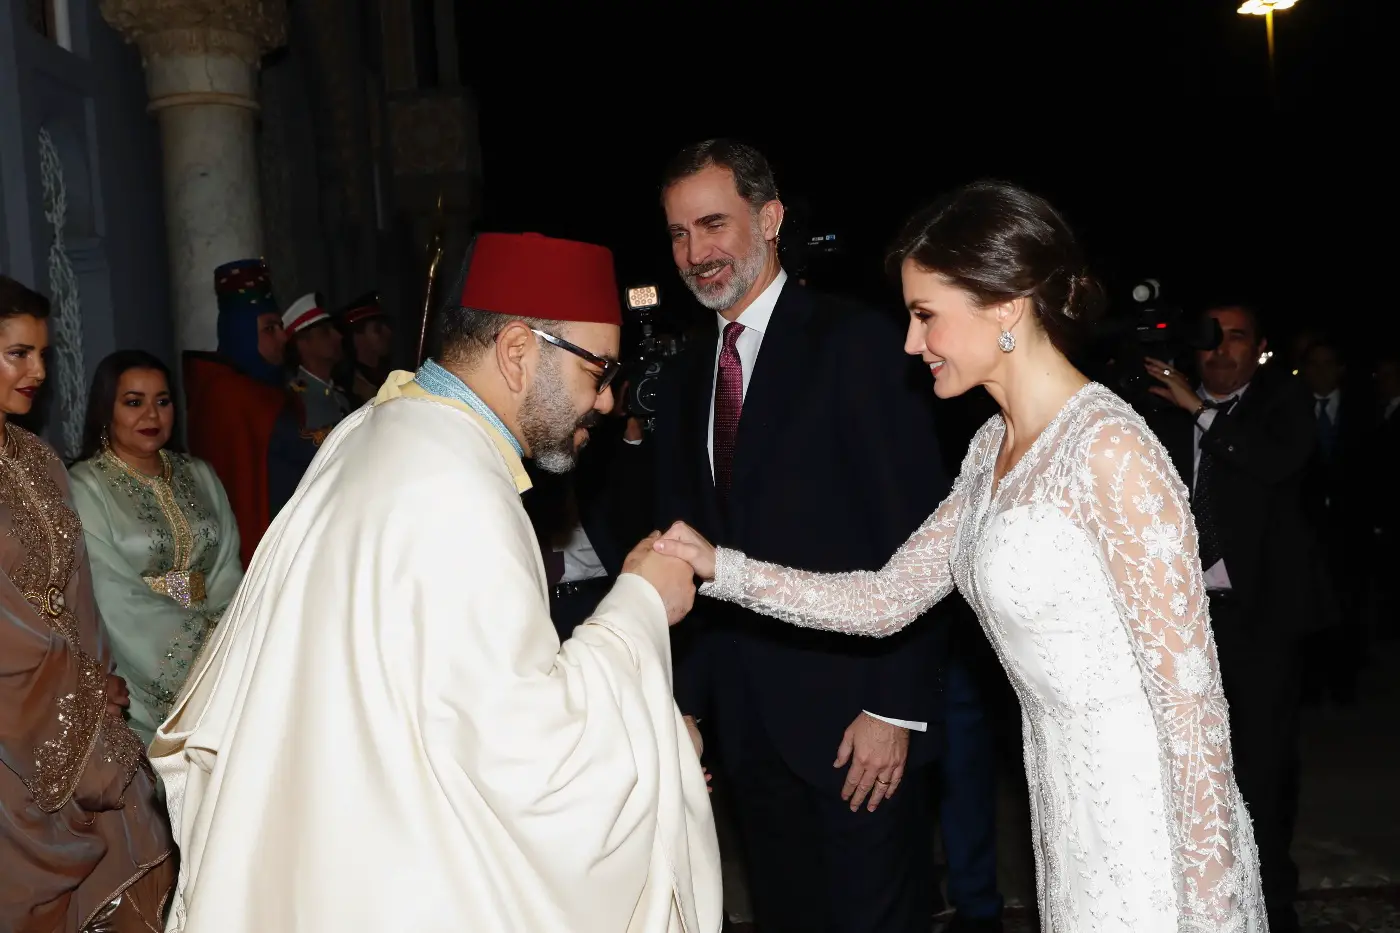 Queen Letizia wore white silk gown and floral tunic from Felipe Varela for Gala Dinner in Morocco